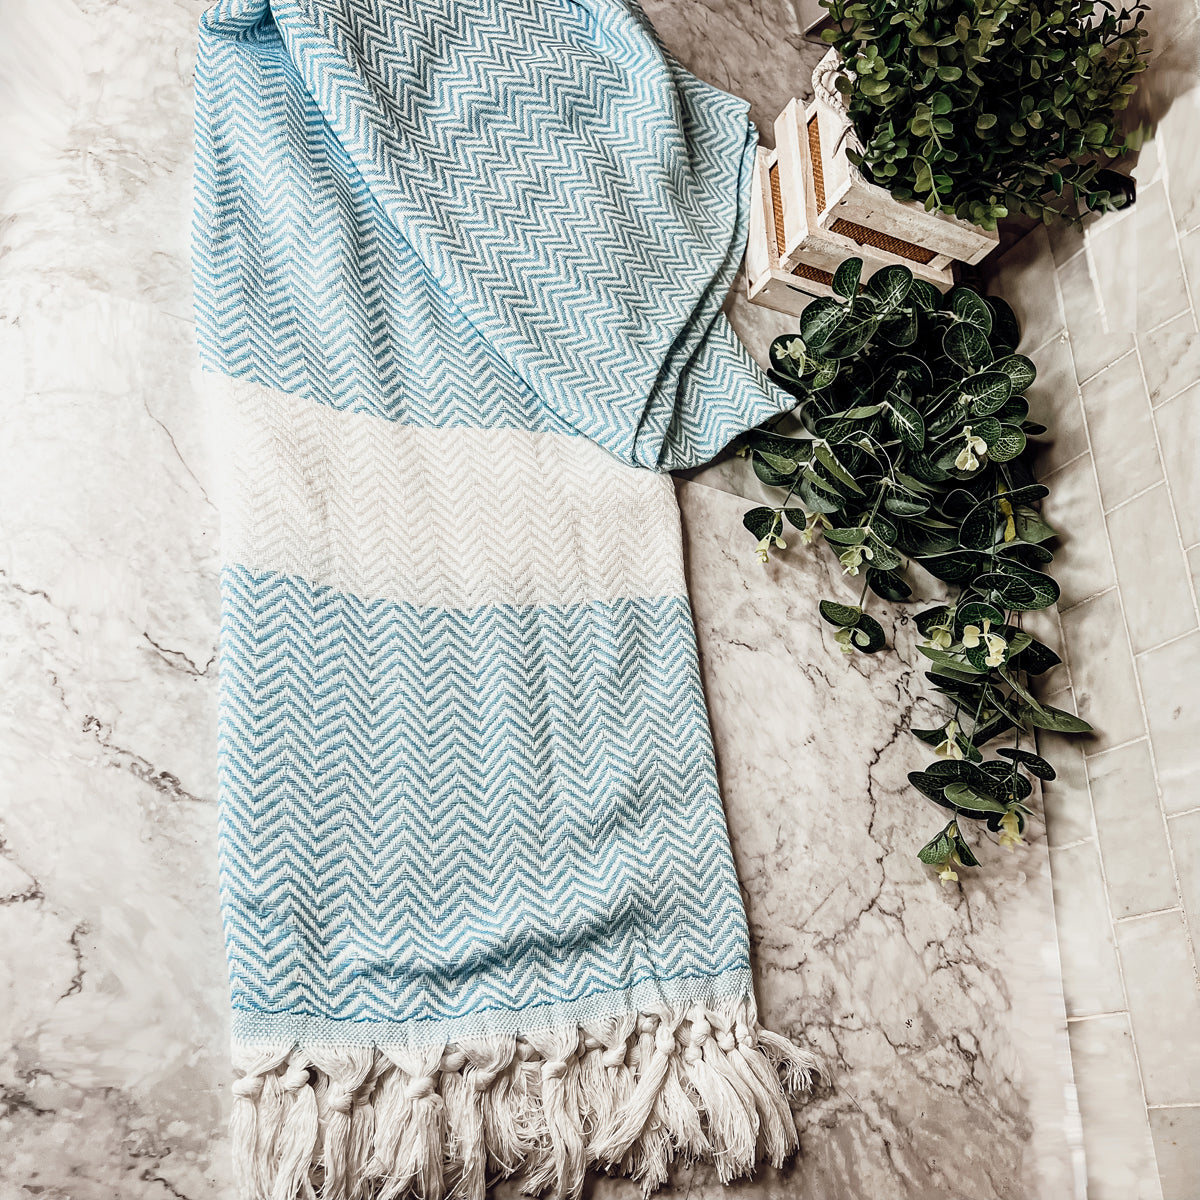 Blue Chevron Towel with Tassels, Fun Modern Oversized Towels made from Cotton